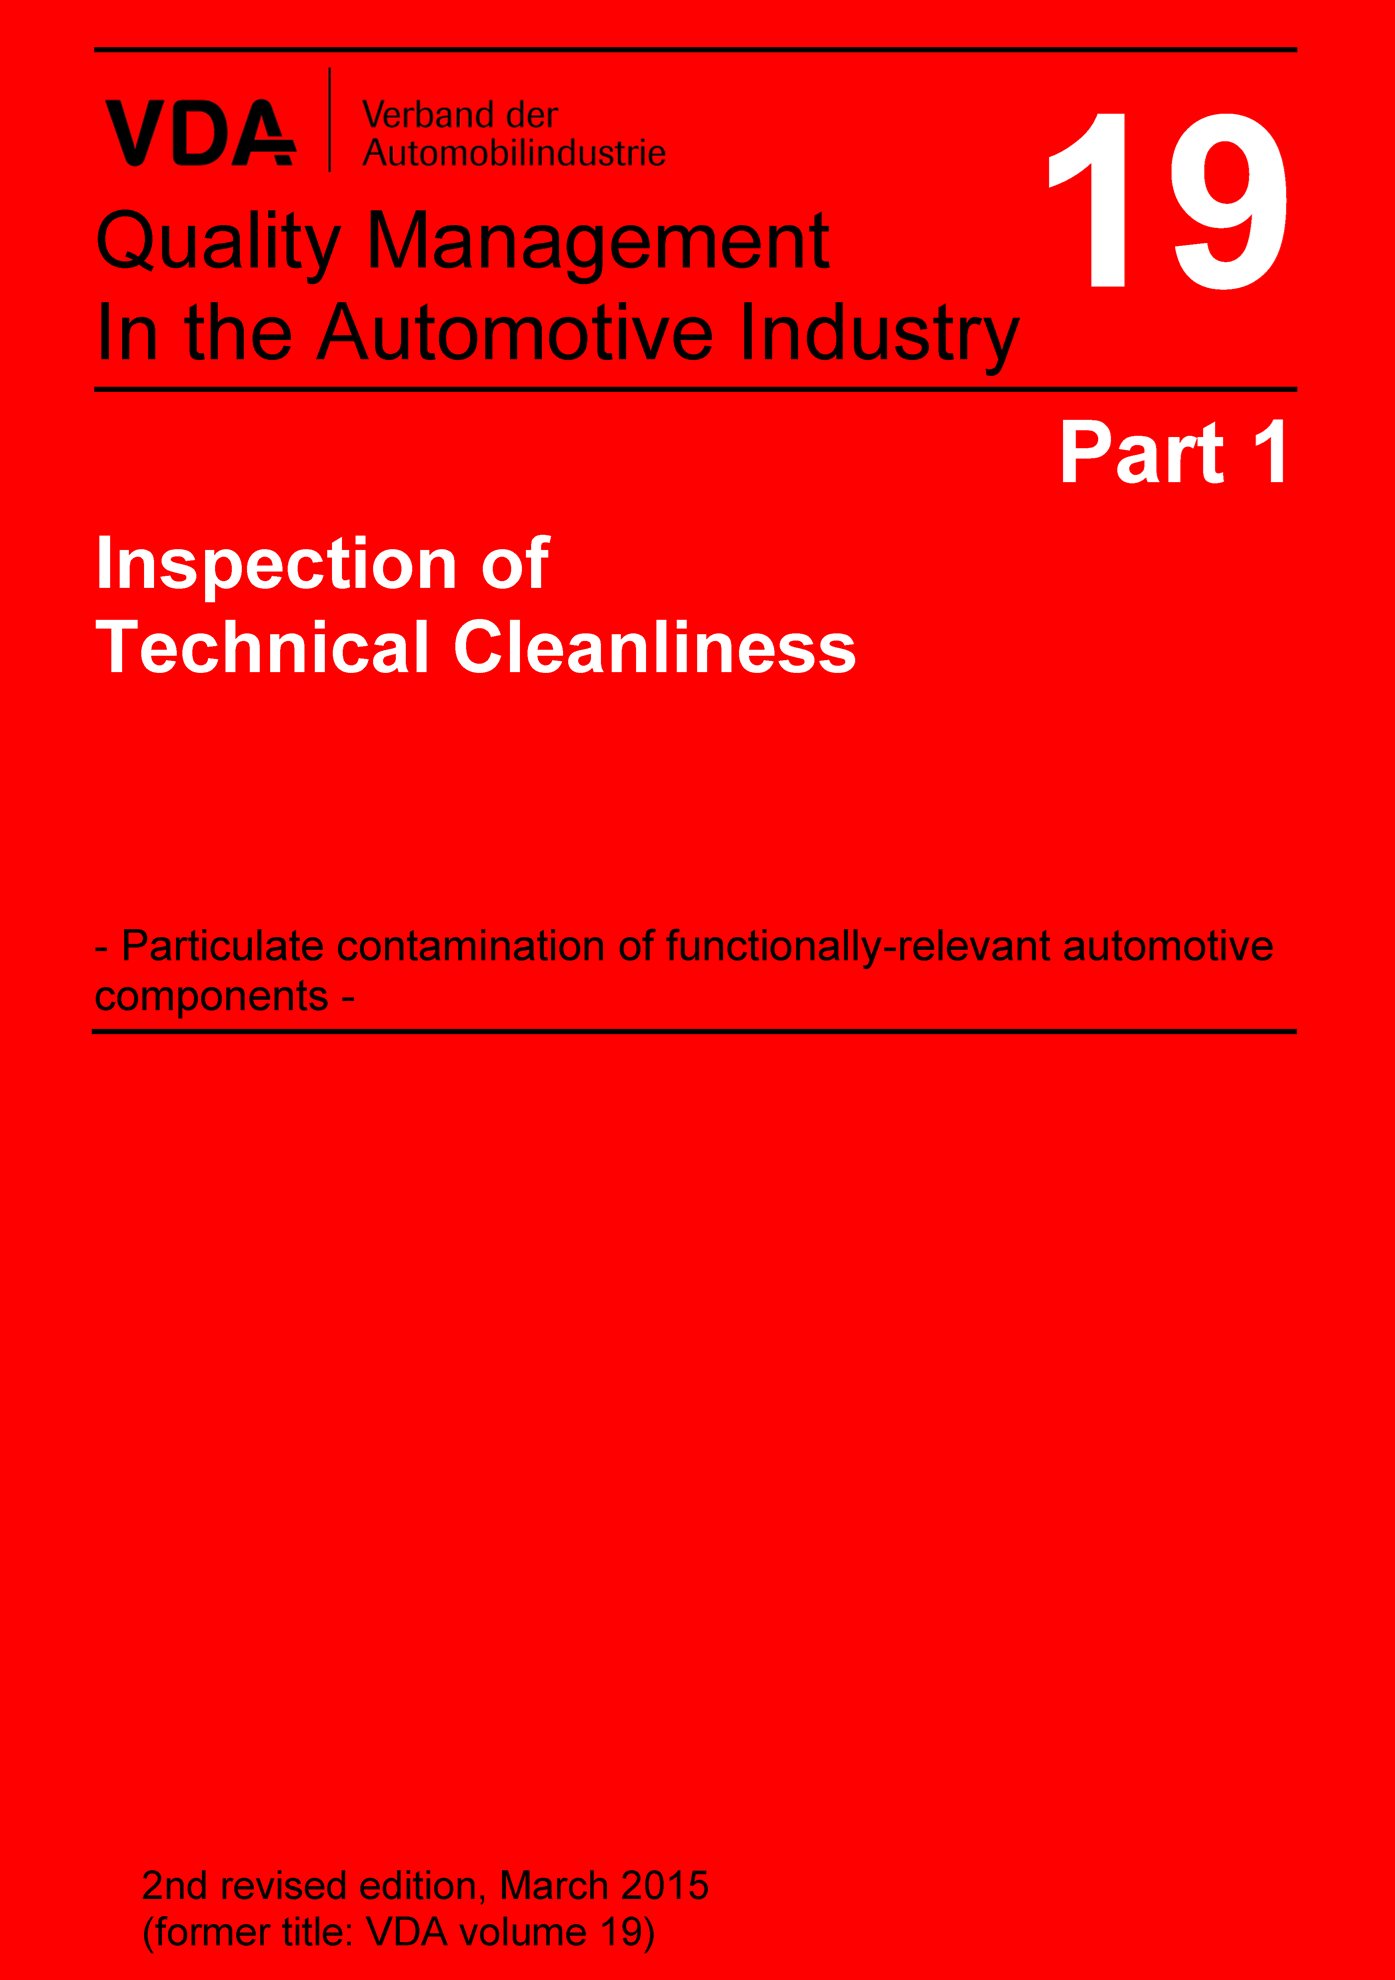 Publikation  VDA Volume 19 Part 1, Inspection of Technical Cleanliness >Particulate Contamination of Functionally Relevant Automotive Components / 2nd Revised Edition, March 2015 (former title: VDA volume 19) 1.3.2015 Ansicht